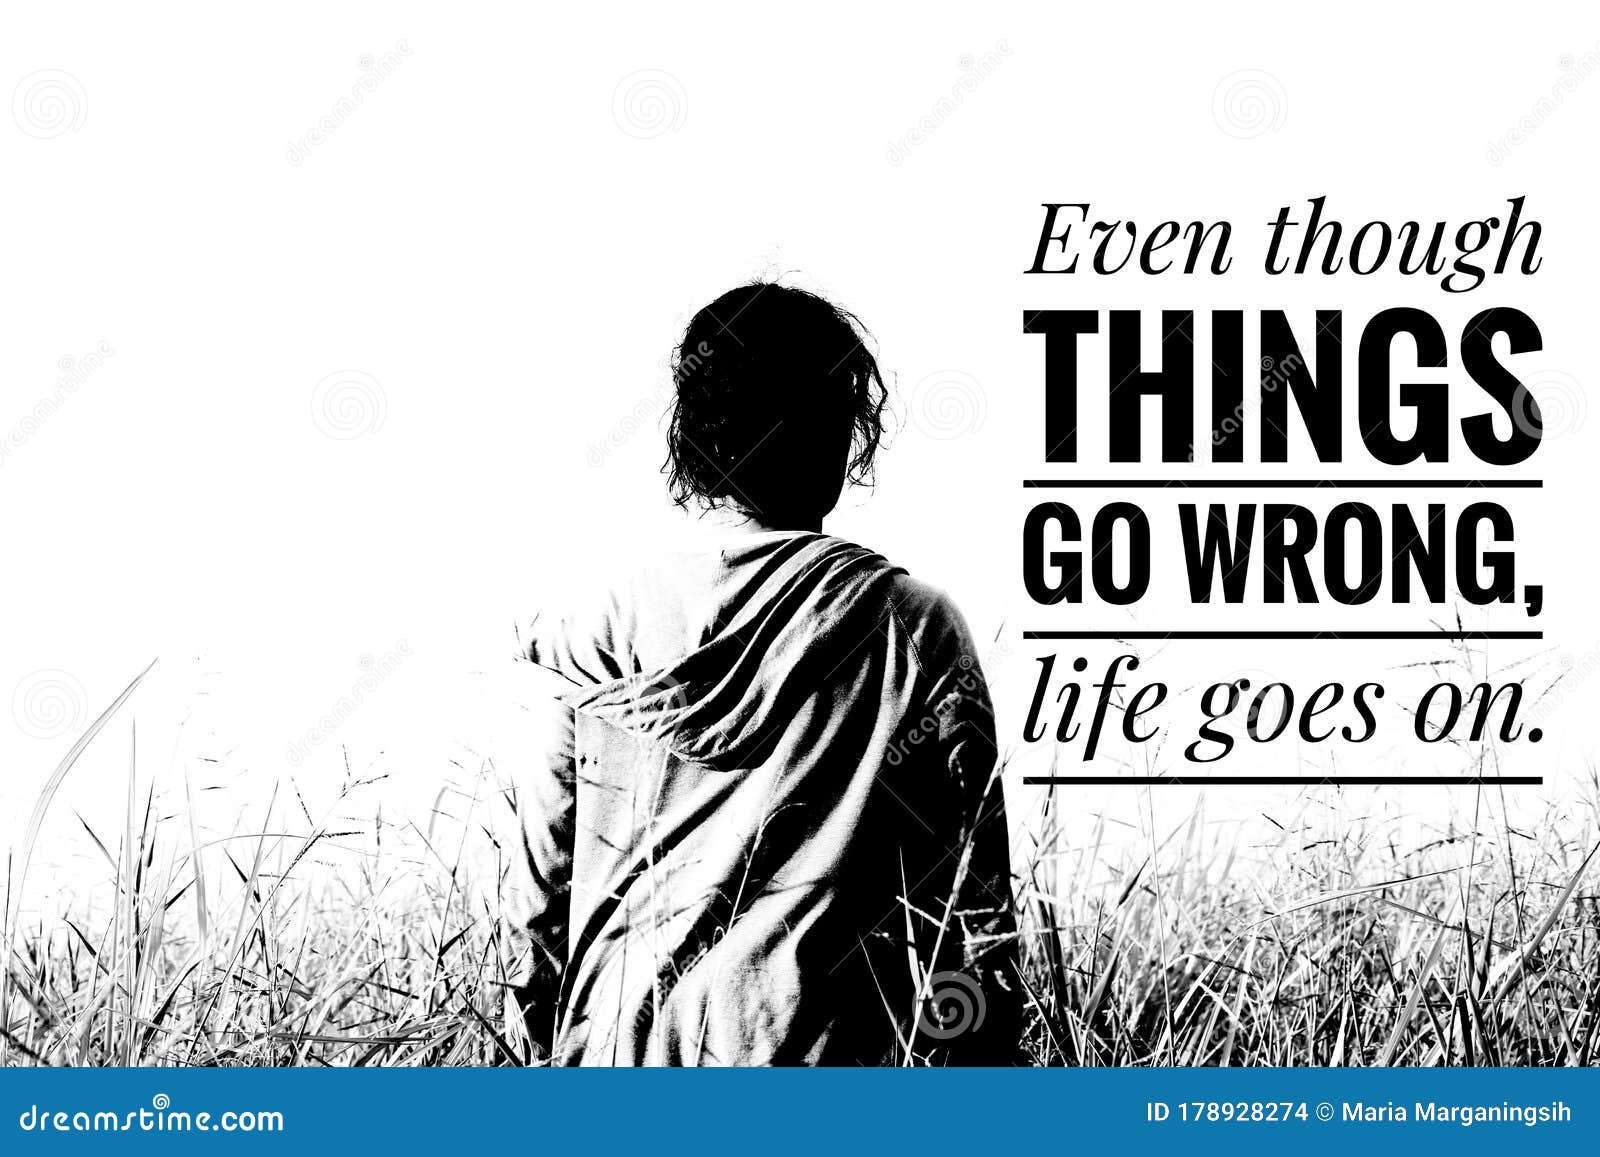 life inspirational quote - even though things go wrong, life goes on. with woman in a meadow in black and white.